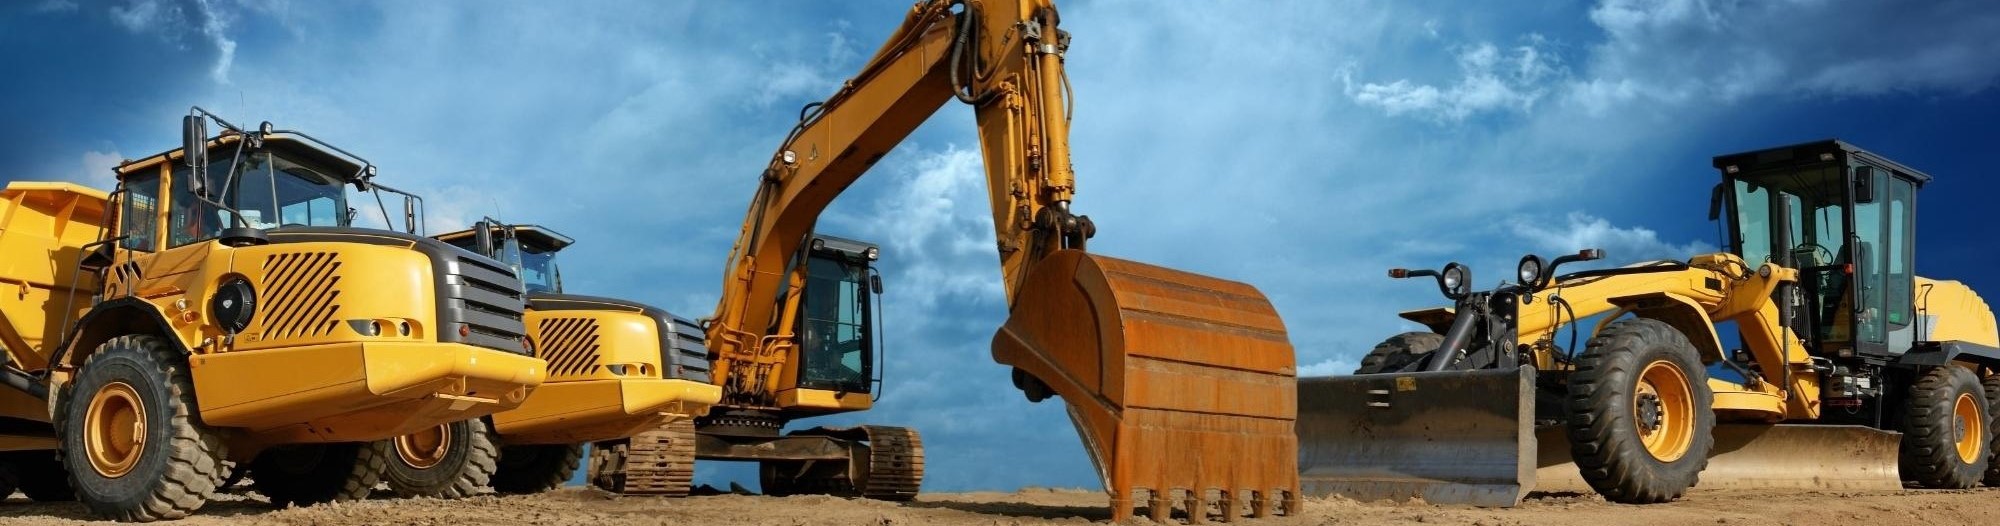 Showcase of different types of industrial vehicles such as excavators and trucks